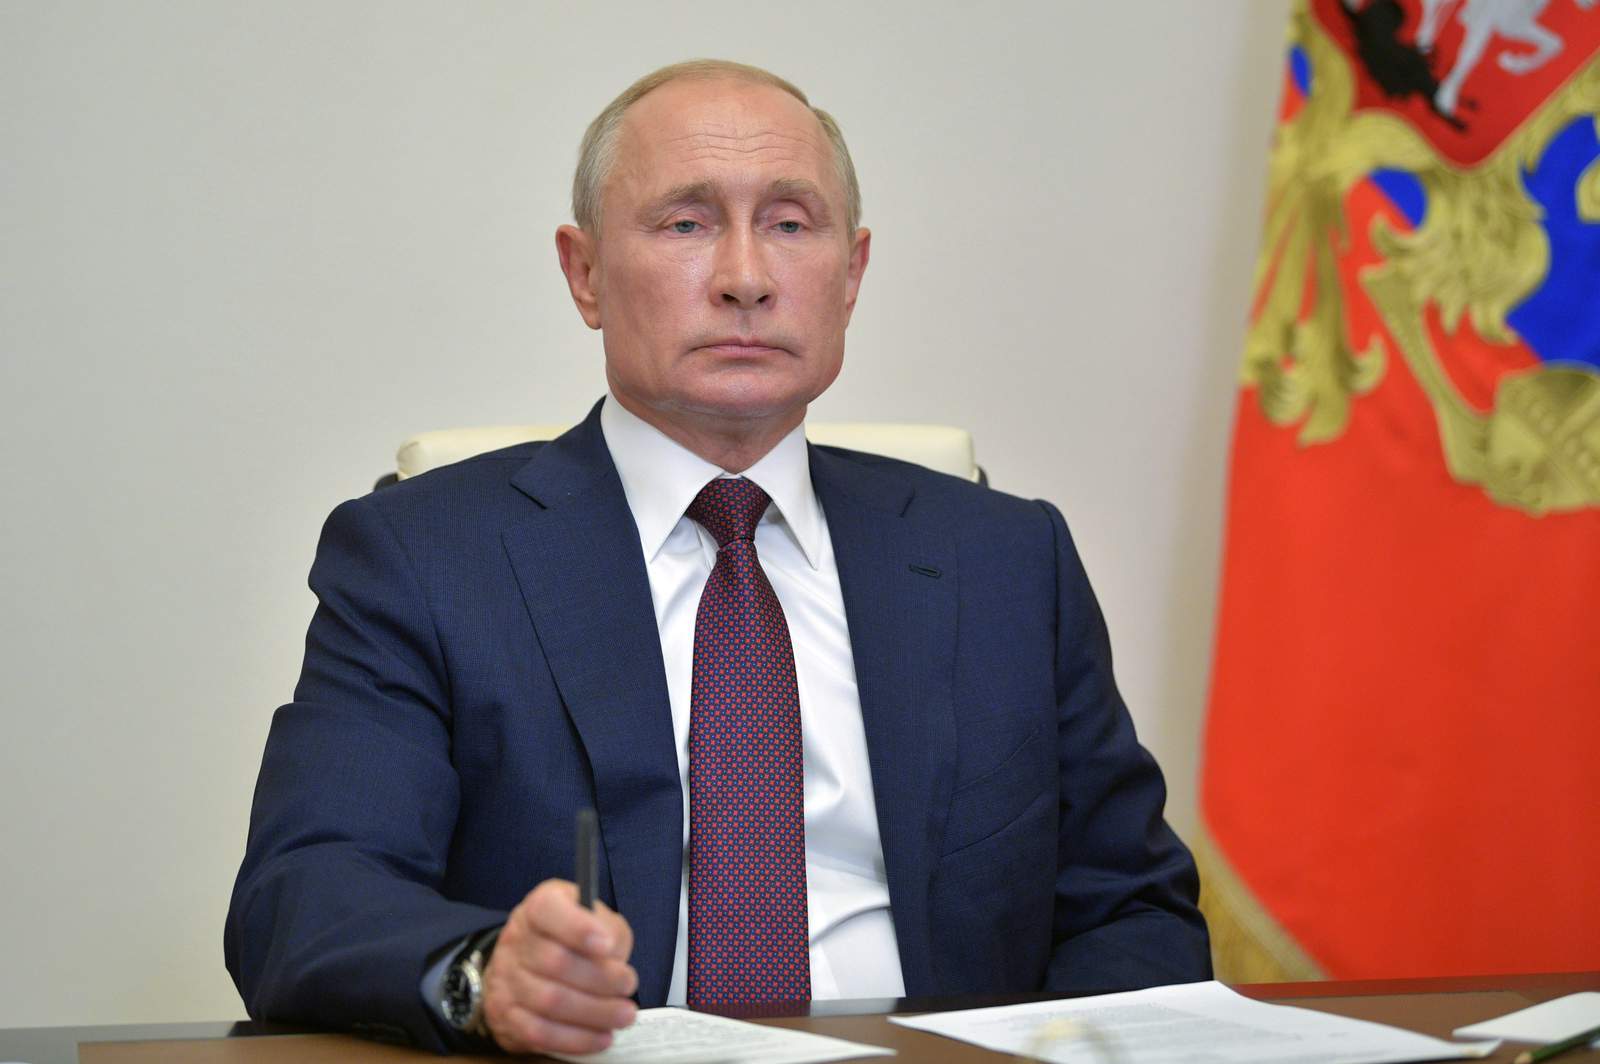 Putin orders amendments extending his rule into constitution